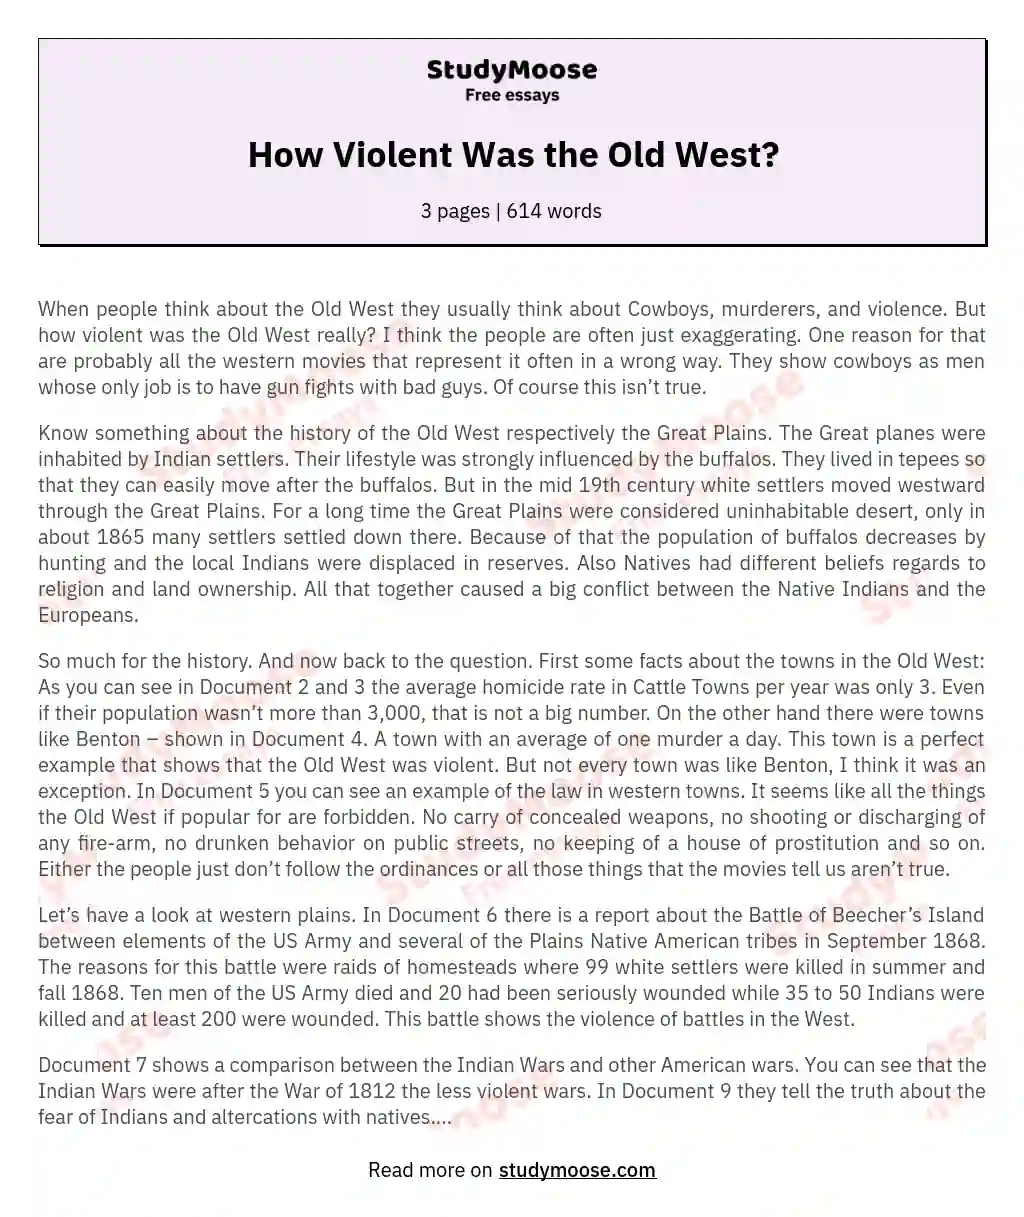 Reevaluating Violence in the Old West essay